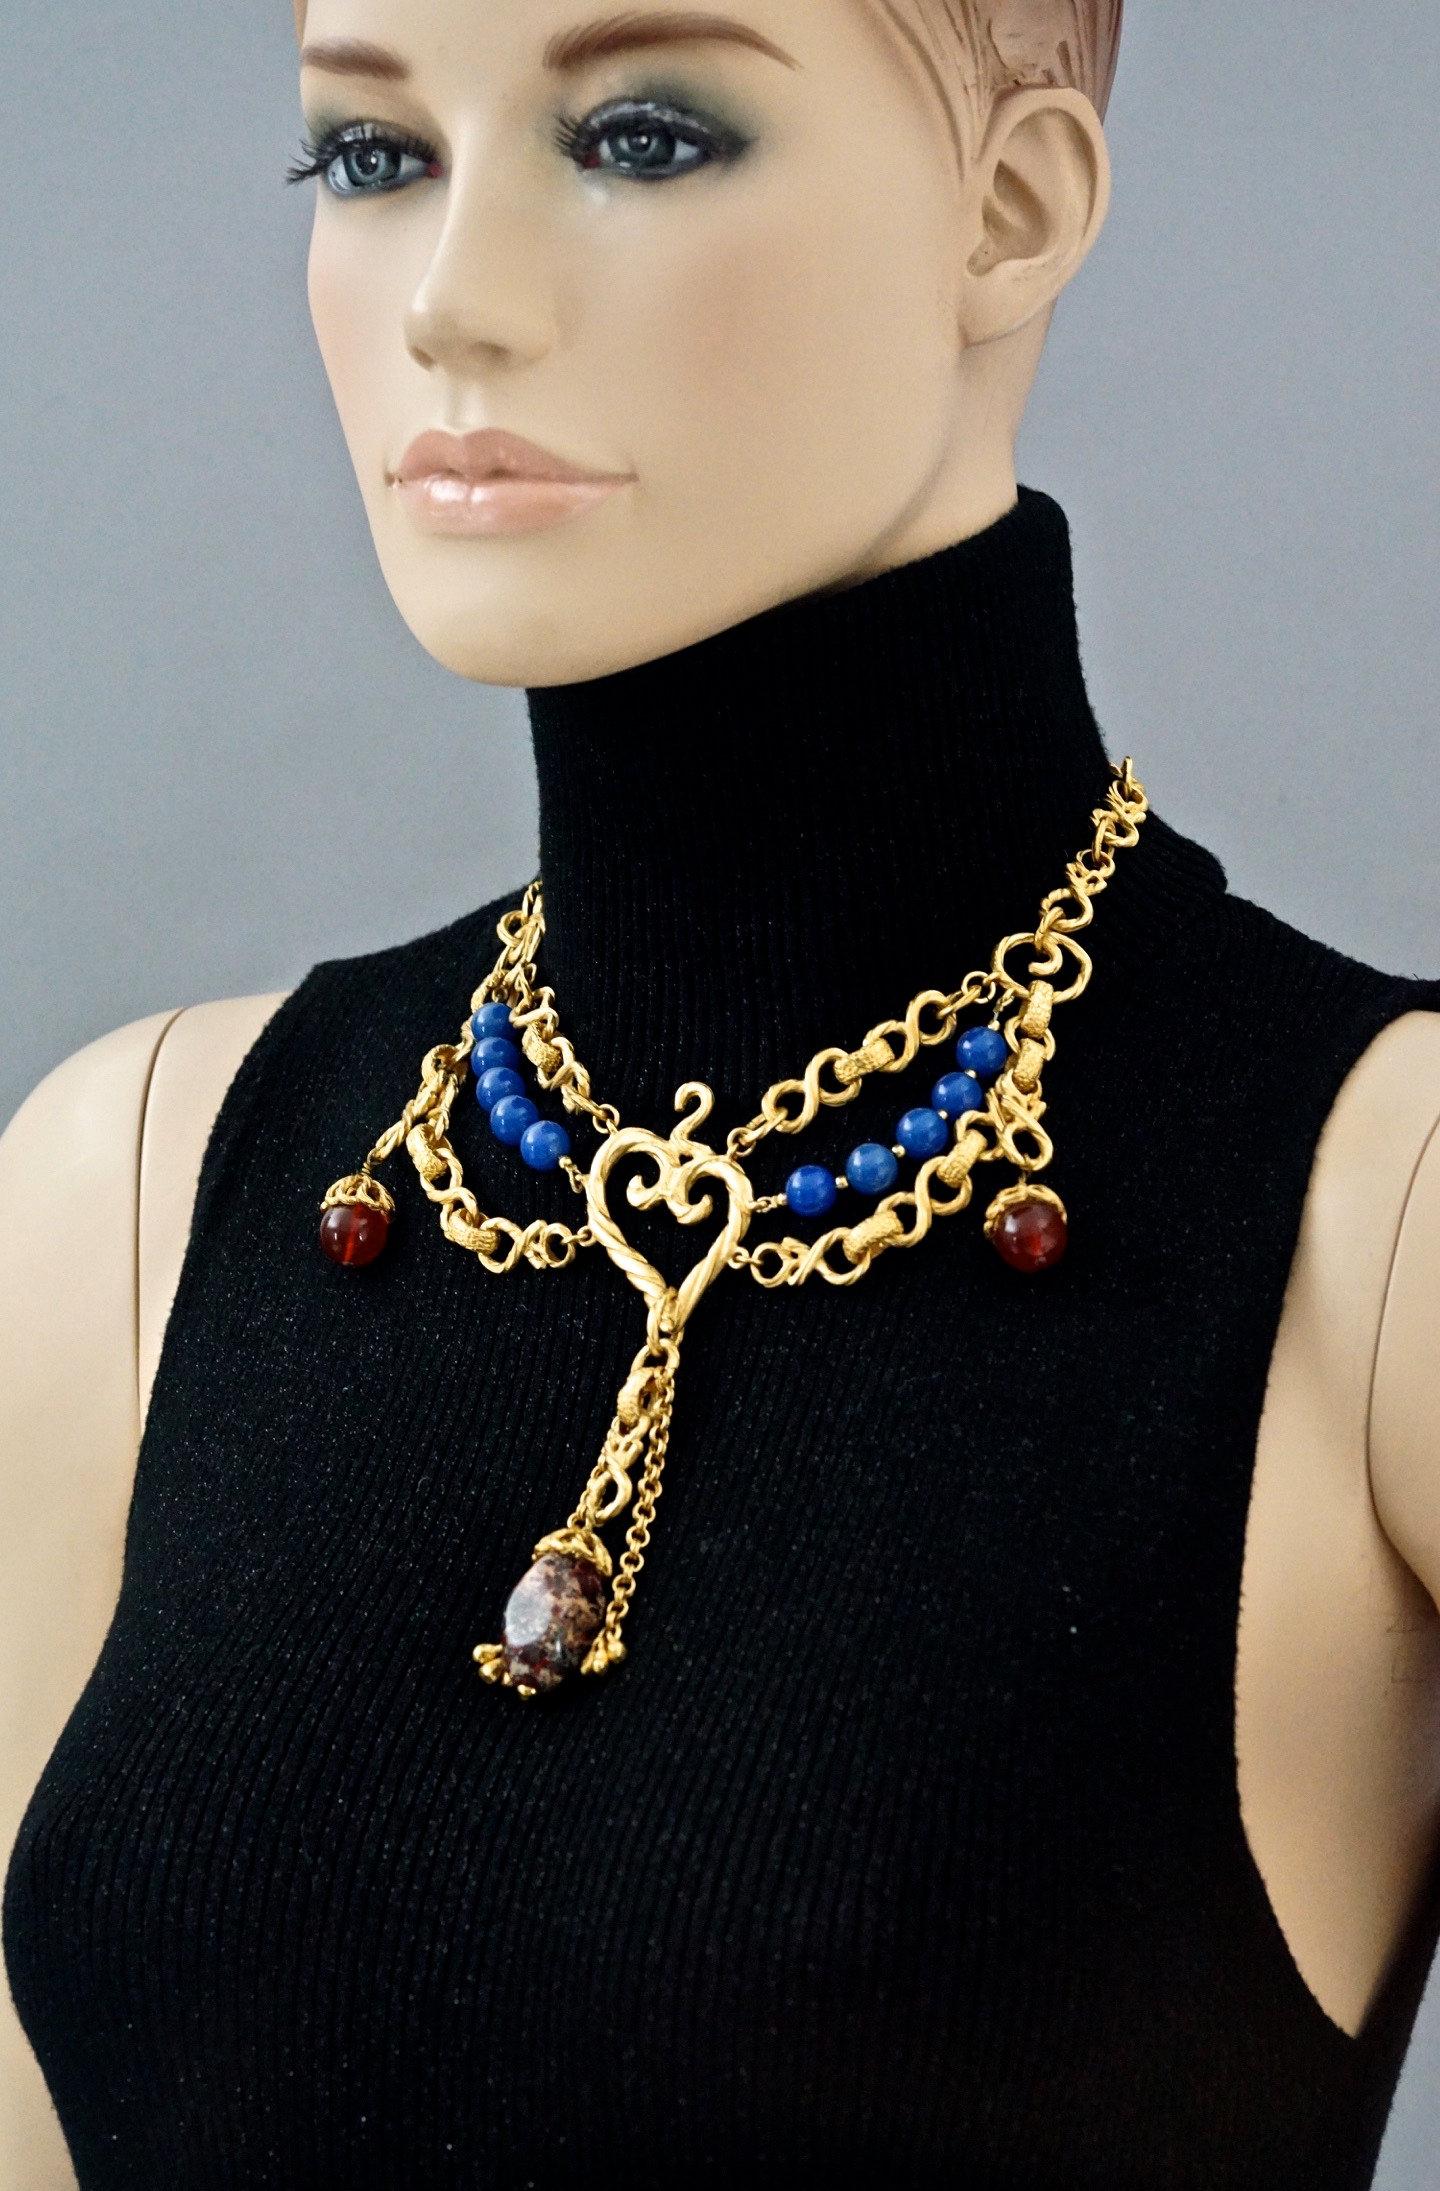 Vintage YVES SAINT LAURENT Ysl Heart Tiered Gilt Bead Necklace

Measurements:
Height: 4.92 inches (12.5 cm)
Wearable Length: 17.51 inches (44.5 cm) until 19.48 inches (49.5 cm)

Features:
- 100% Authentic YVES SAINT LAURENT.
- Textured heart